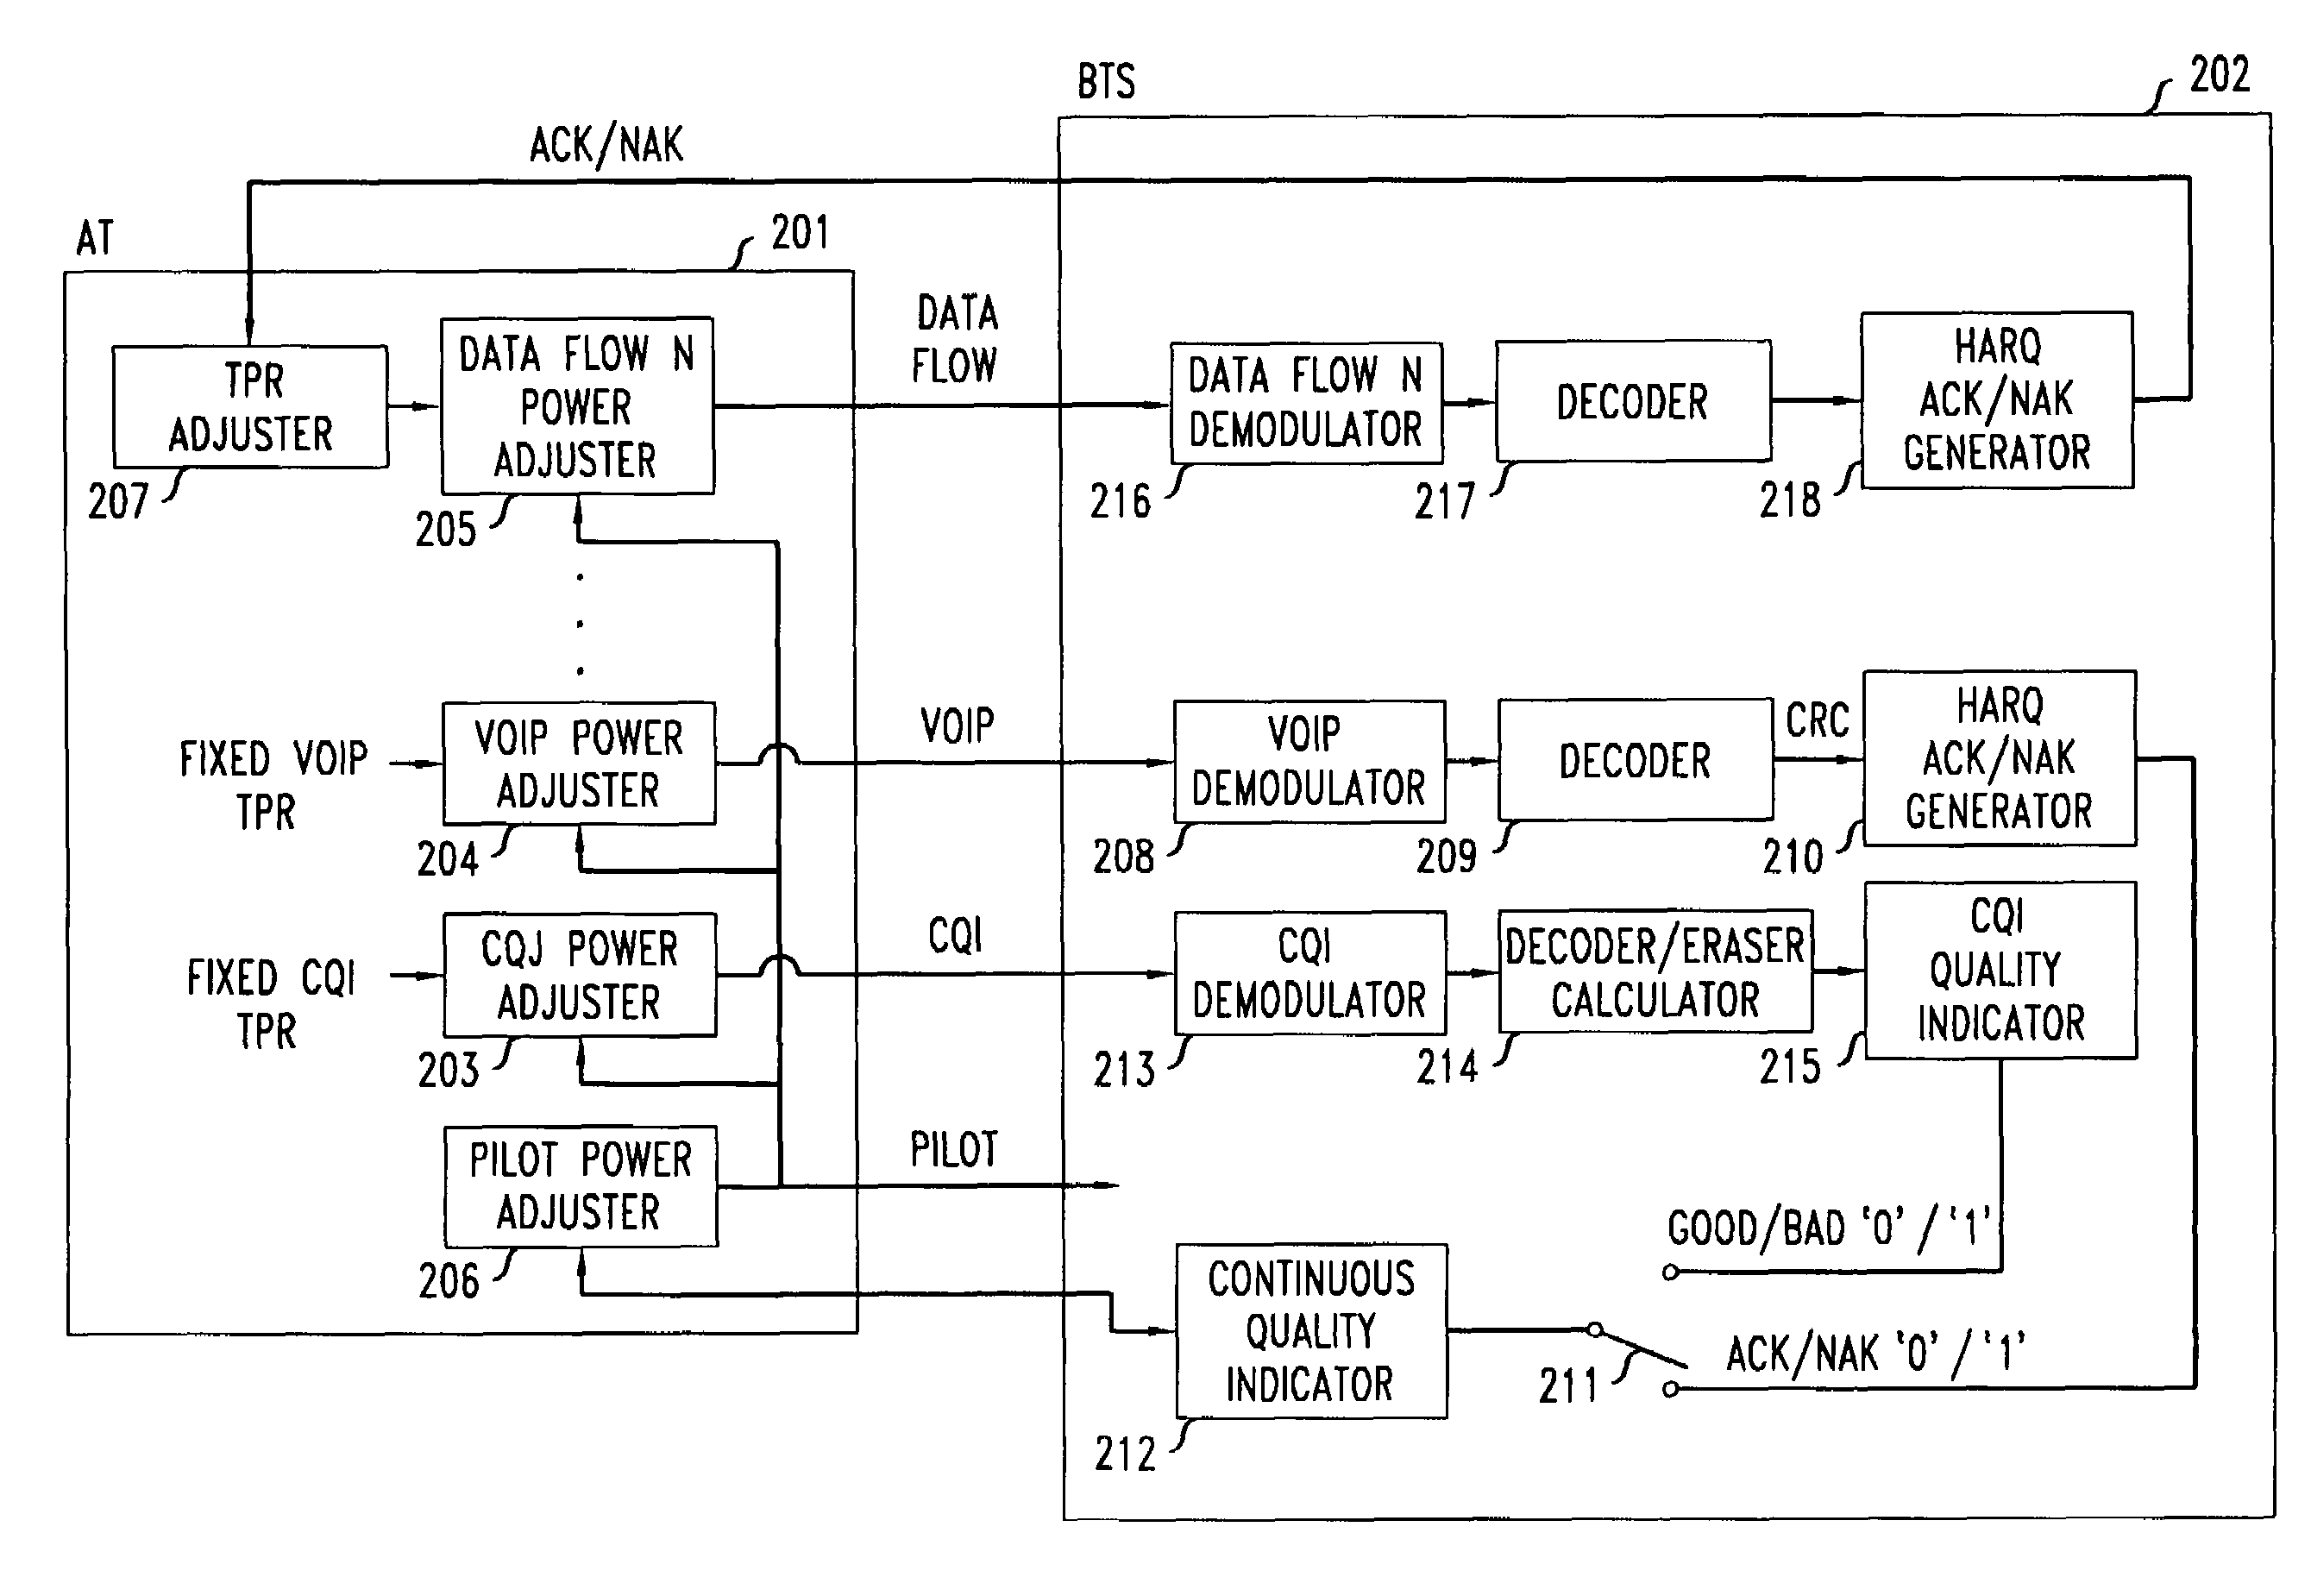 Method of reverse link dynamic power control in a wireless communication system using per-flow quality feedback for multi-flow data traffic